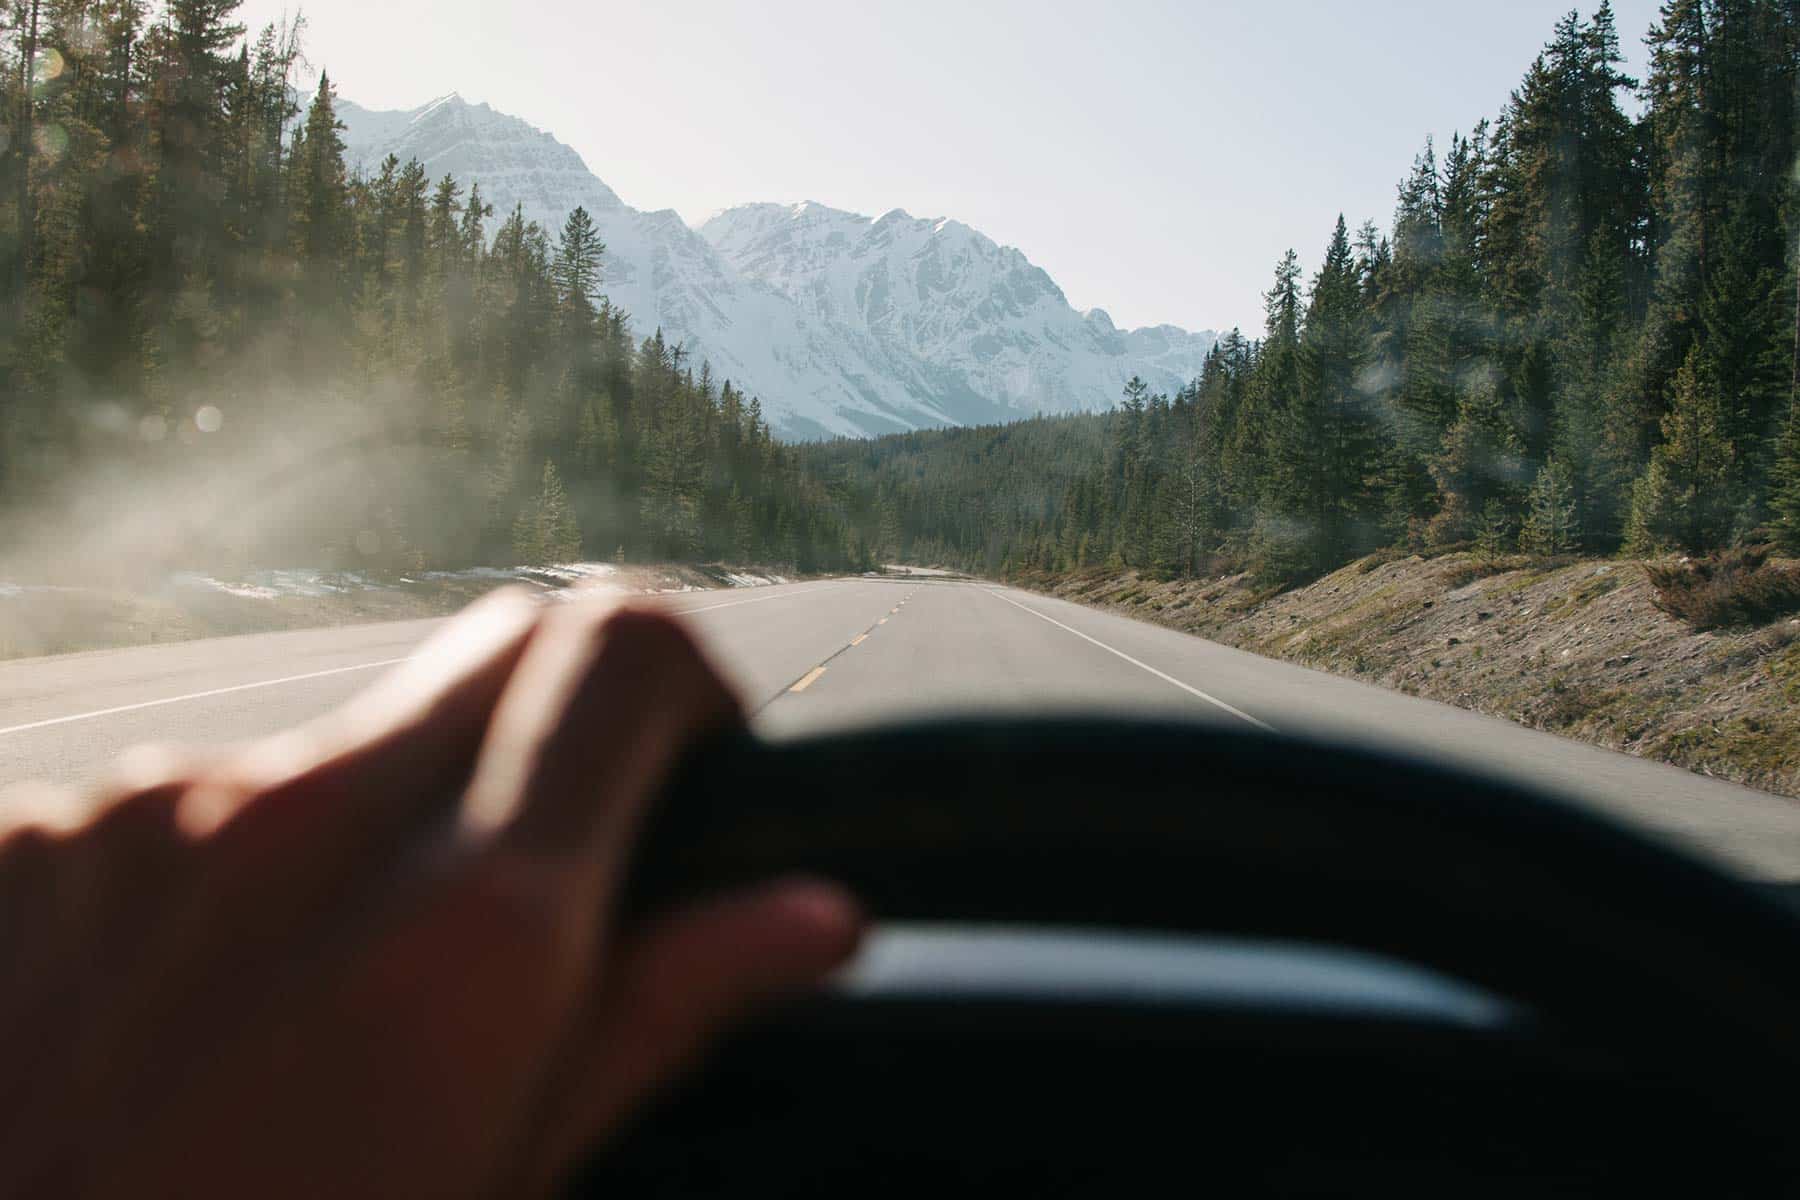 A person's hand on a steering wheel with a mountain road visible through the windshield